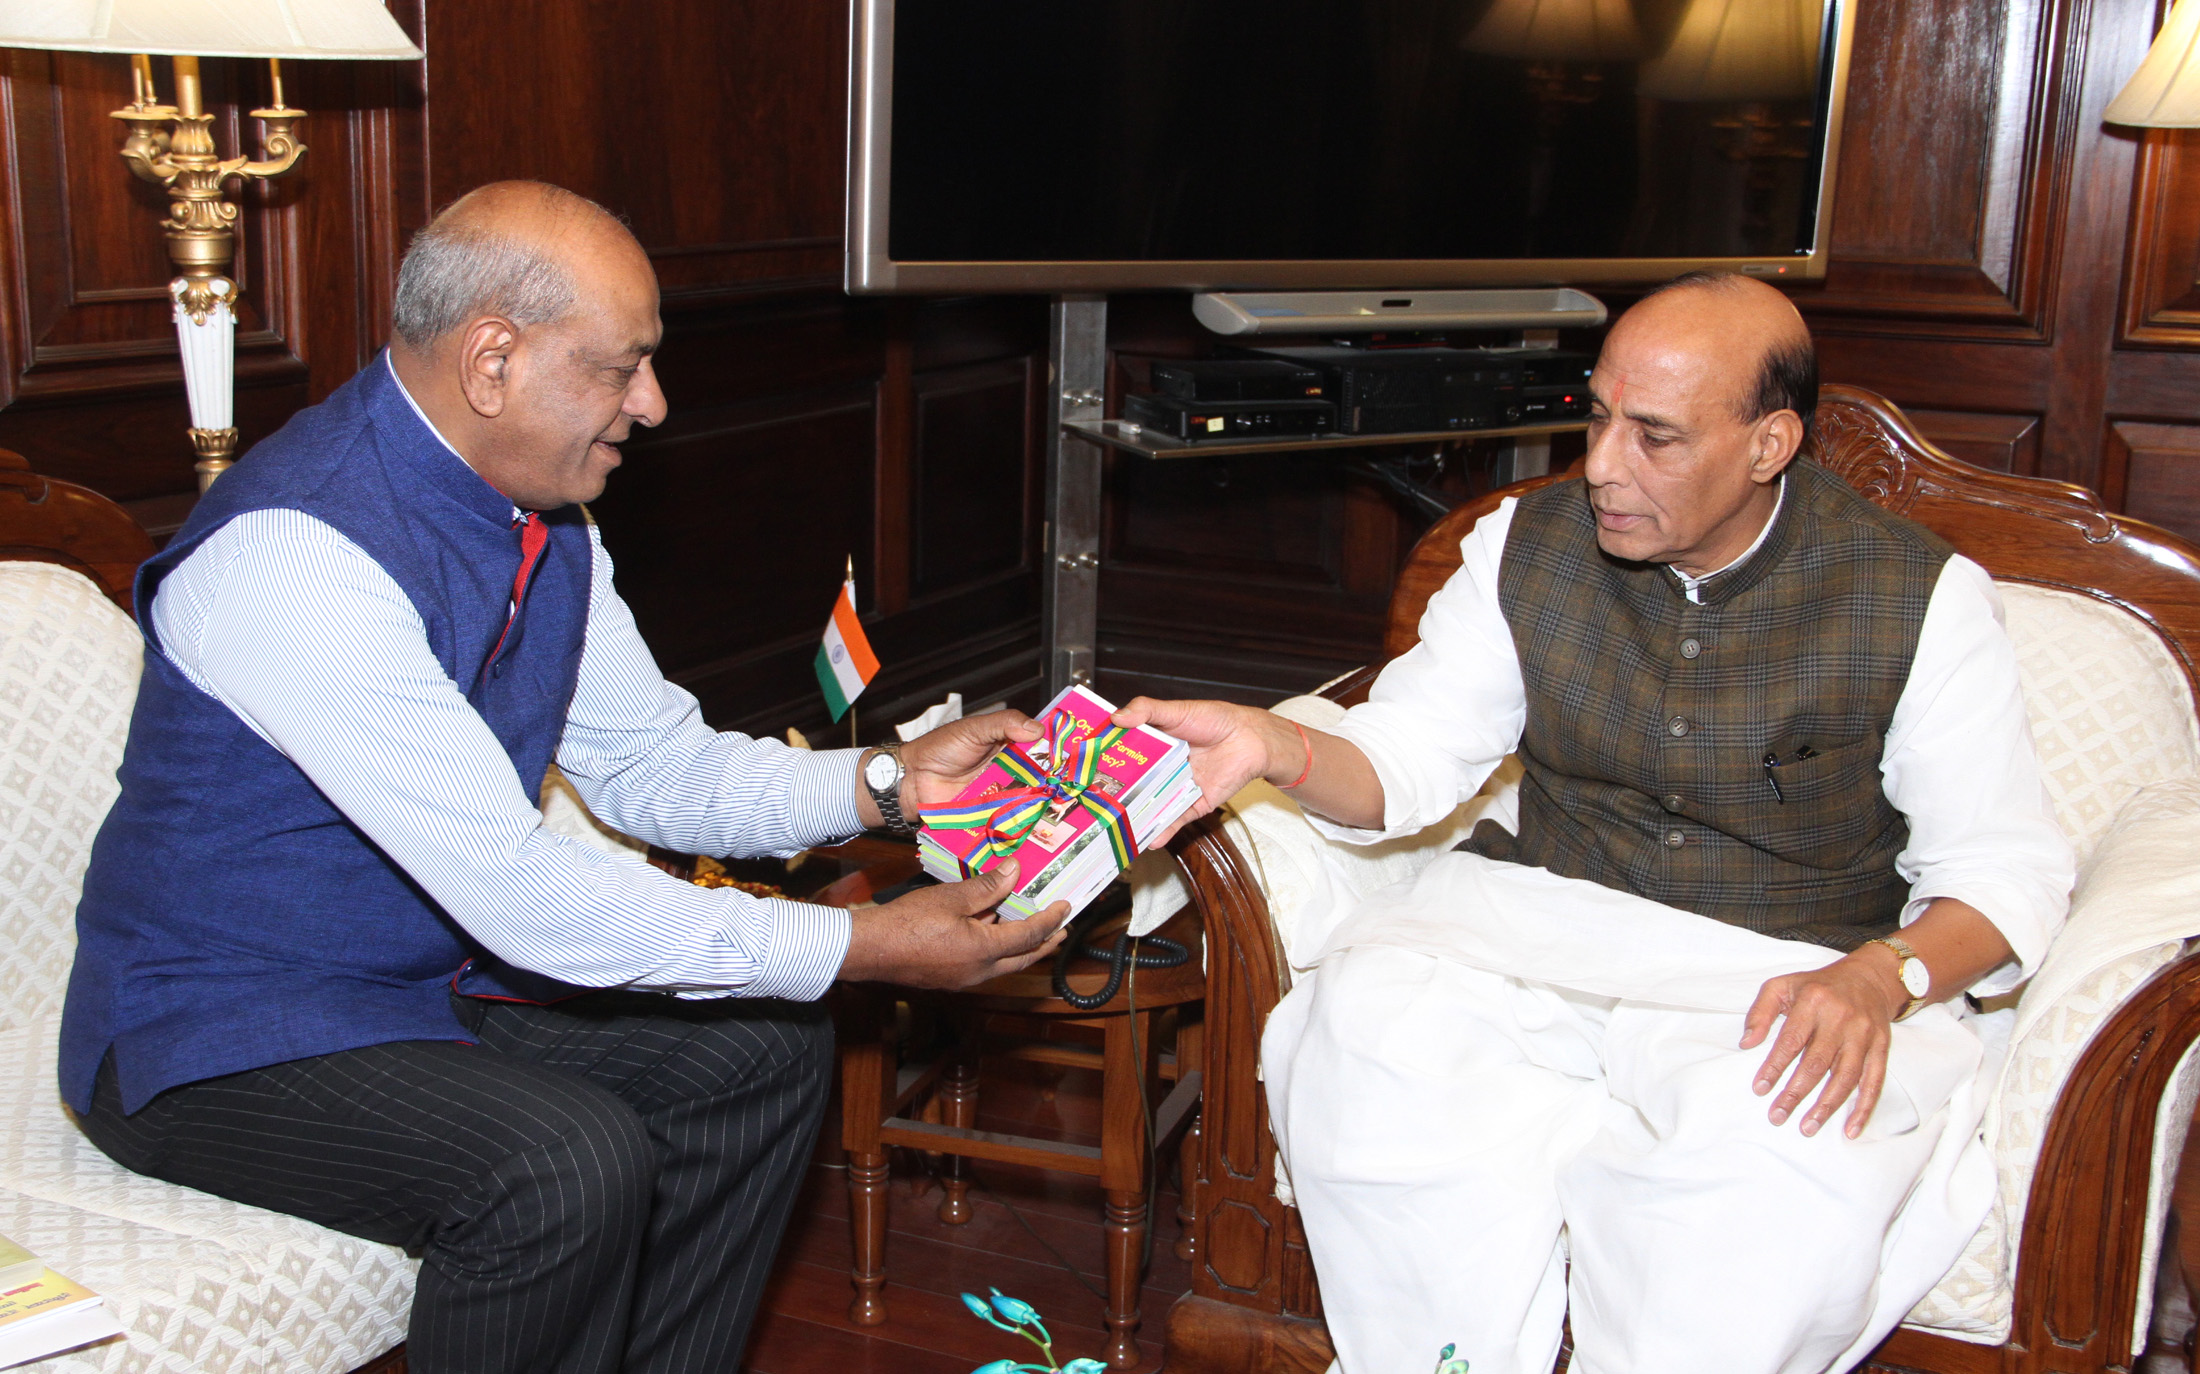 The High Commissioner of Mauritius in India, Mr. Jagdishwar Goburdhun calling on the Union Home Minister, Shri Rajnath Singh, in New Delhi on January 12, 2016.